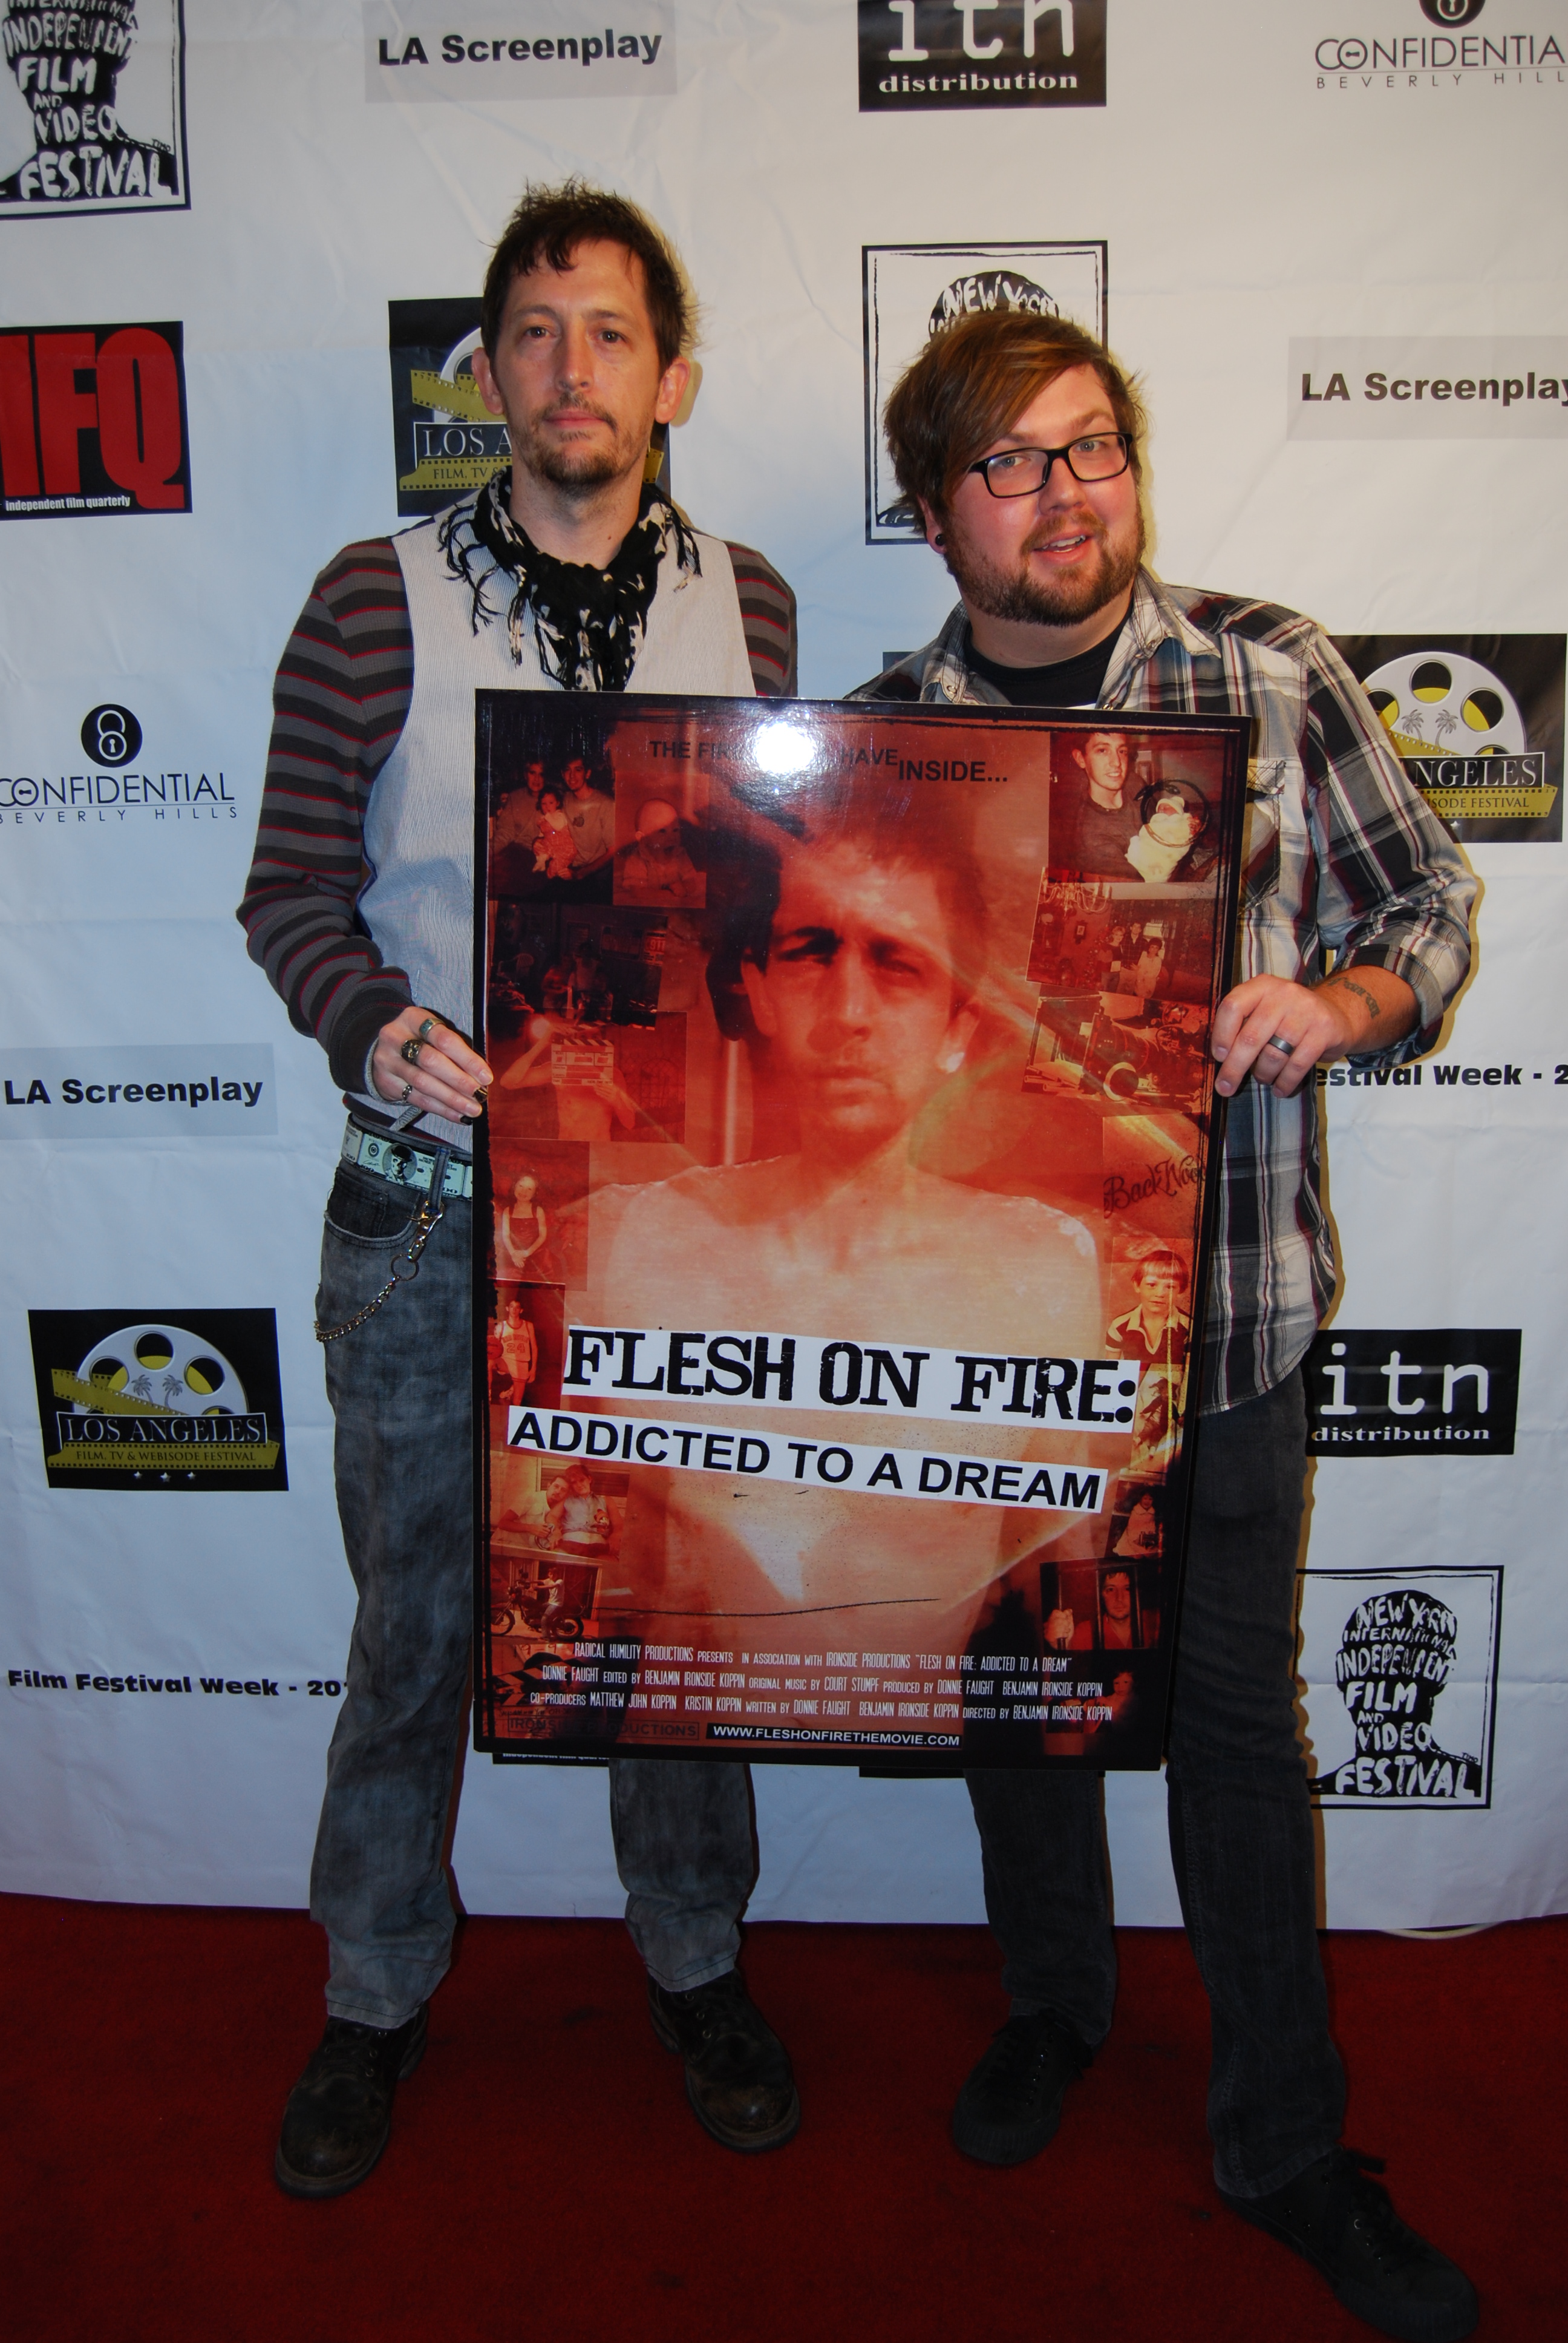 Actor Donnie Faught and Director Benjamin Ironside Koppin